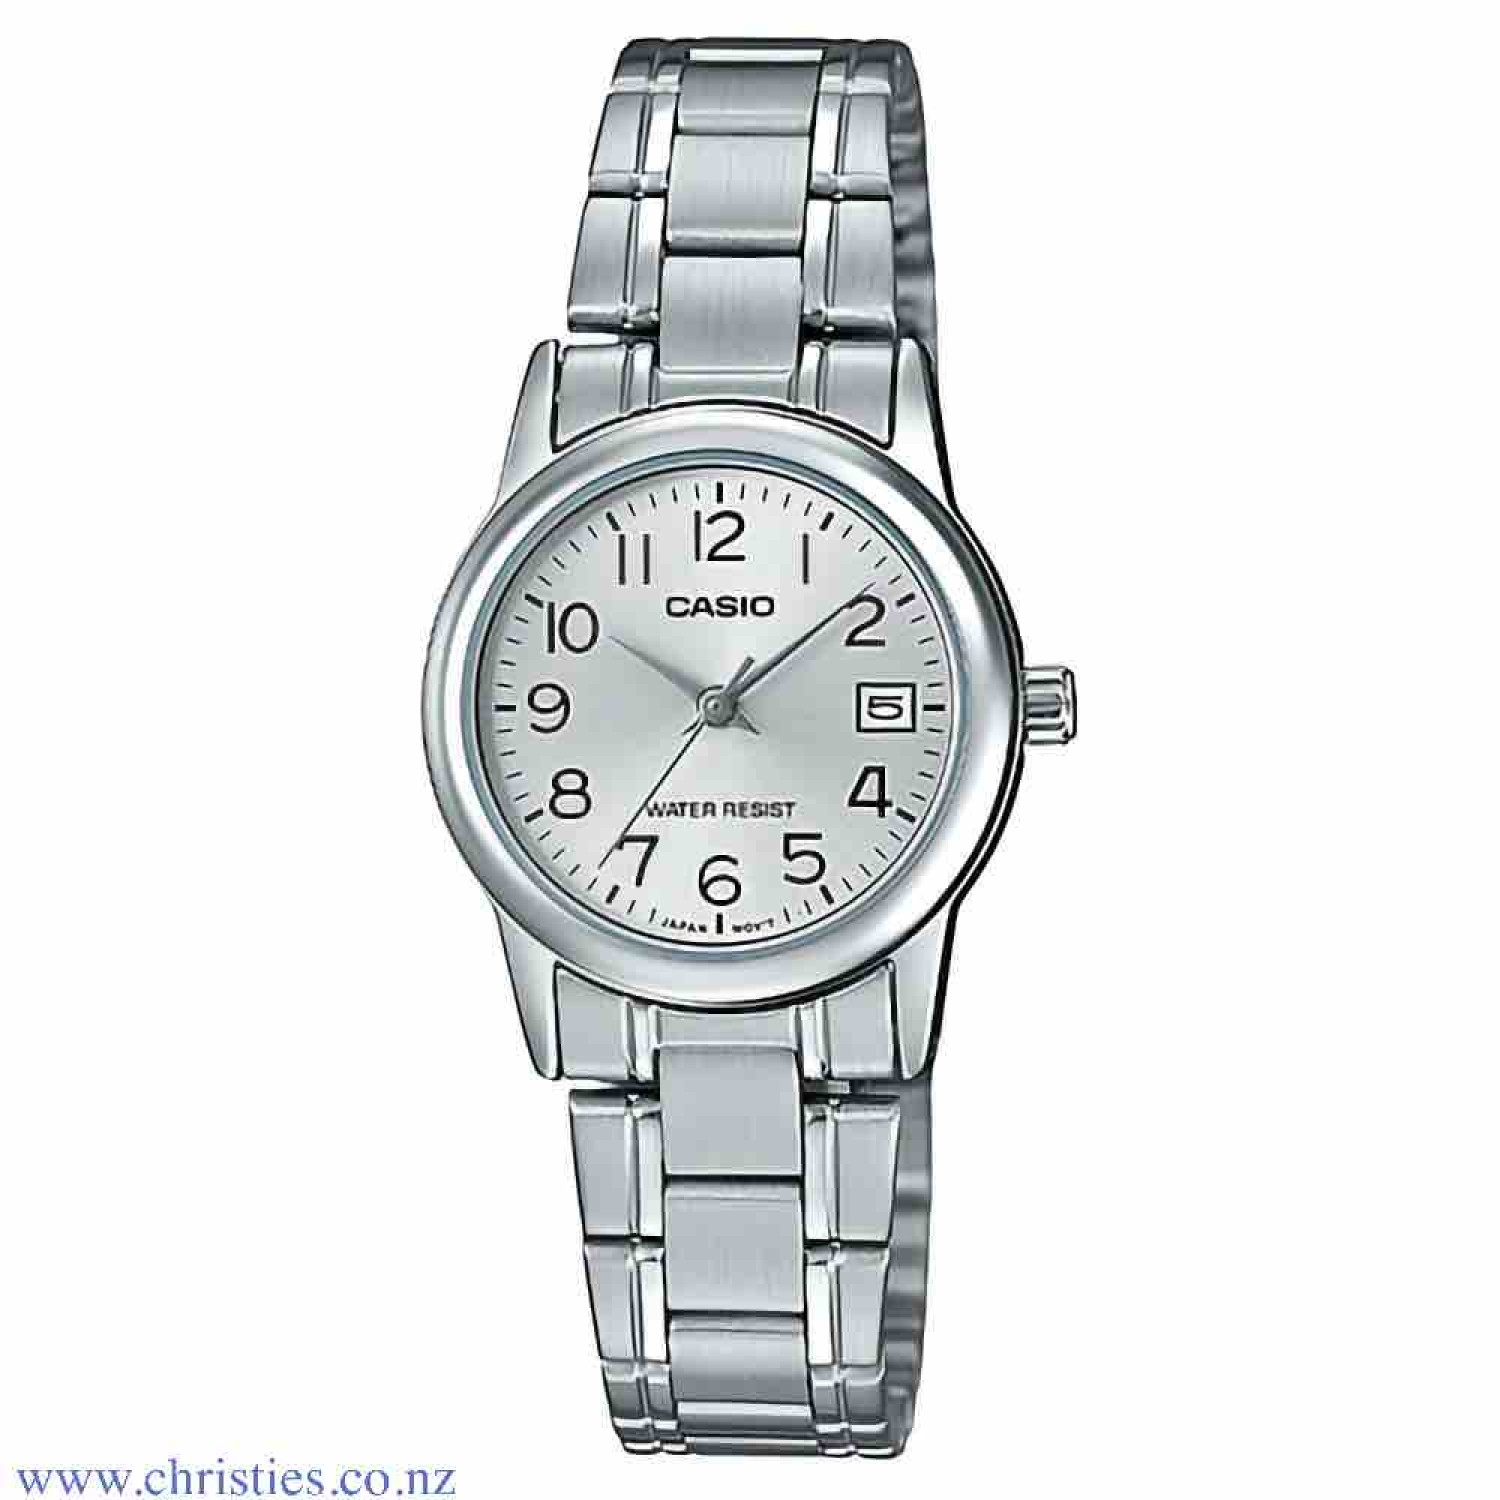 LTPV002D-7B Casio Ladies Stainless Steel Watch. From Casio an analogue stainless steel watch with clear easy to read dial and water resistant. LAYBUY - Pay it easy, in 6 weekly payments and have it now. Only pay the price of your purchase, when you pay yo